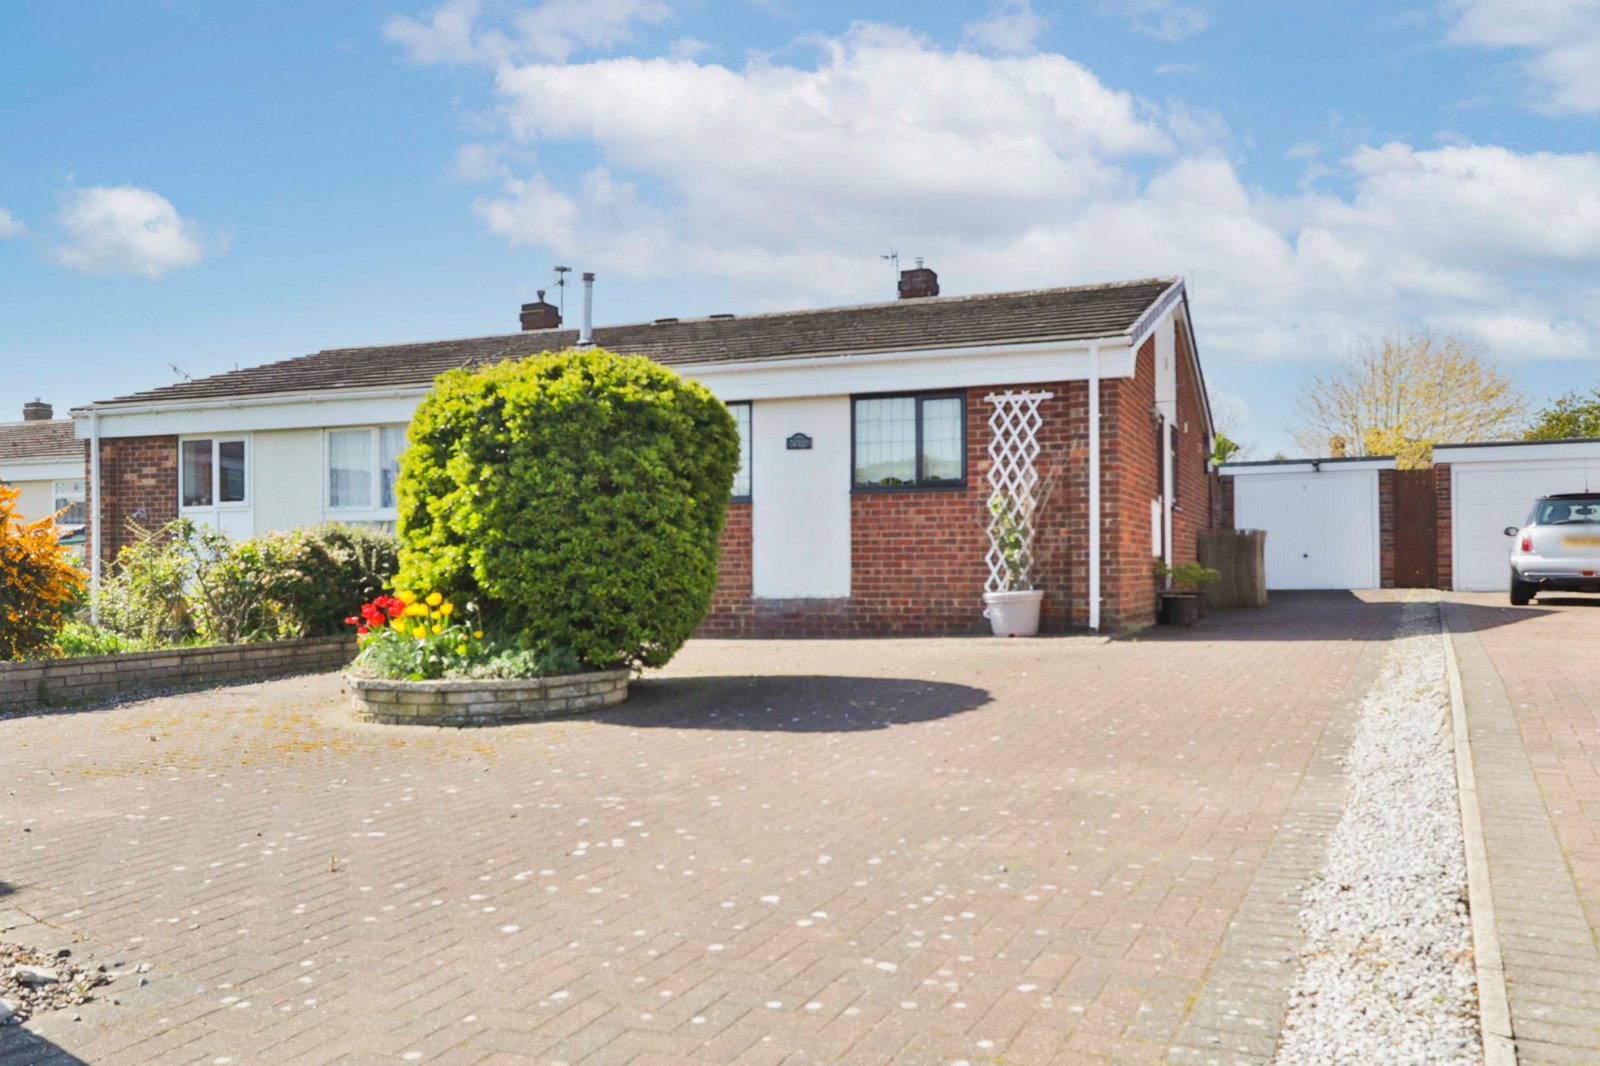 2 bed bungalow for sale in Inmans Road, Hedon - Property Image 1